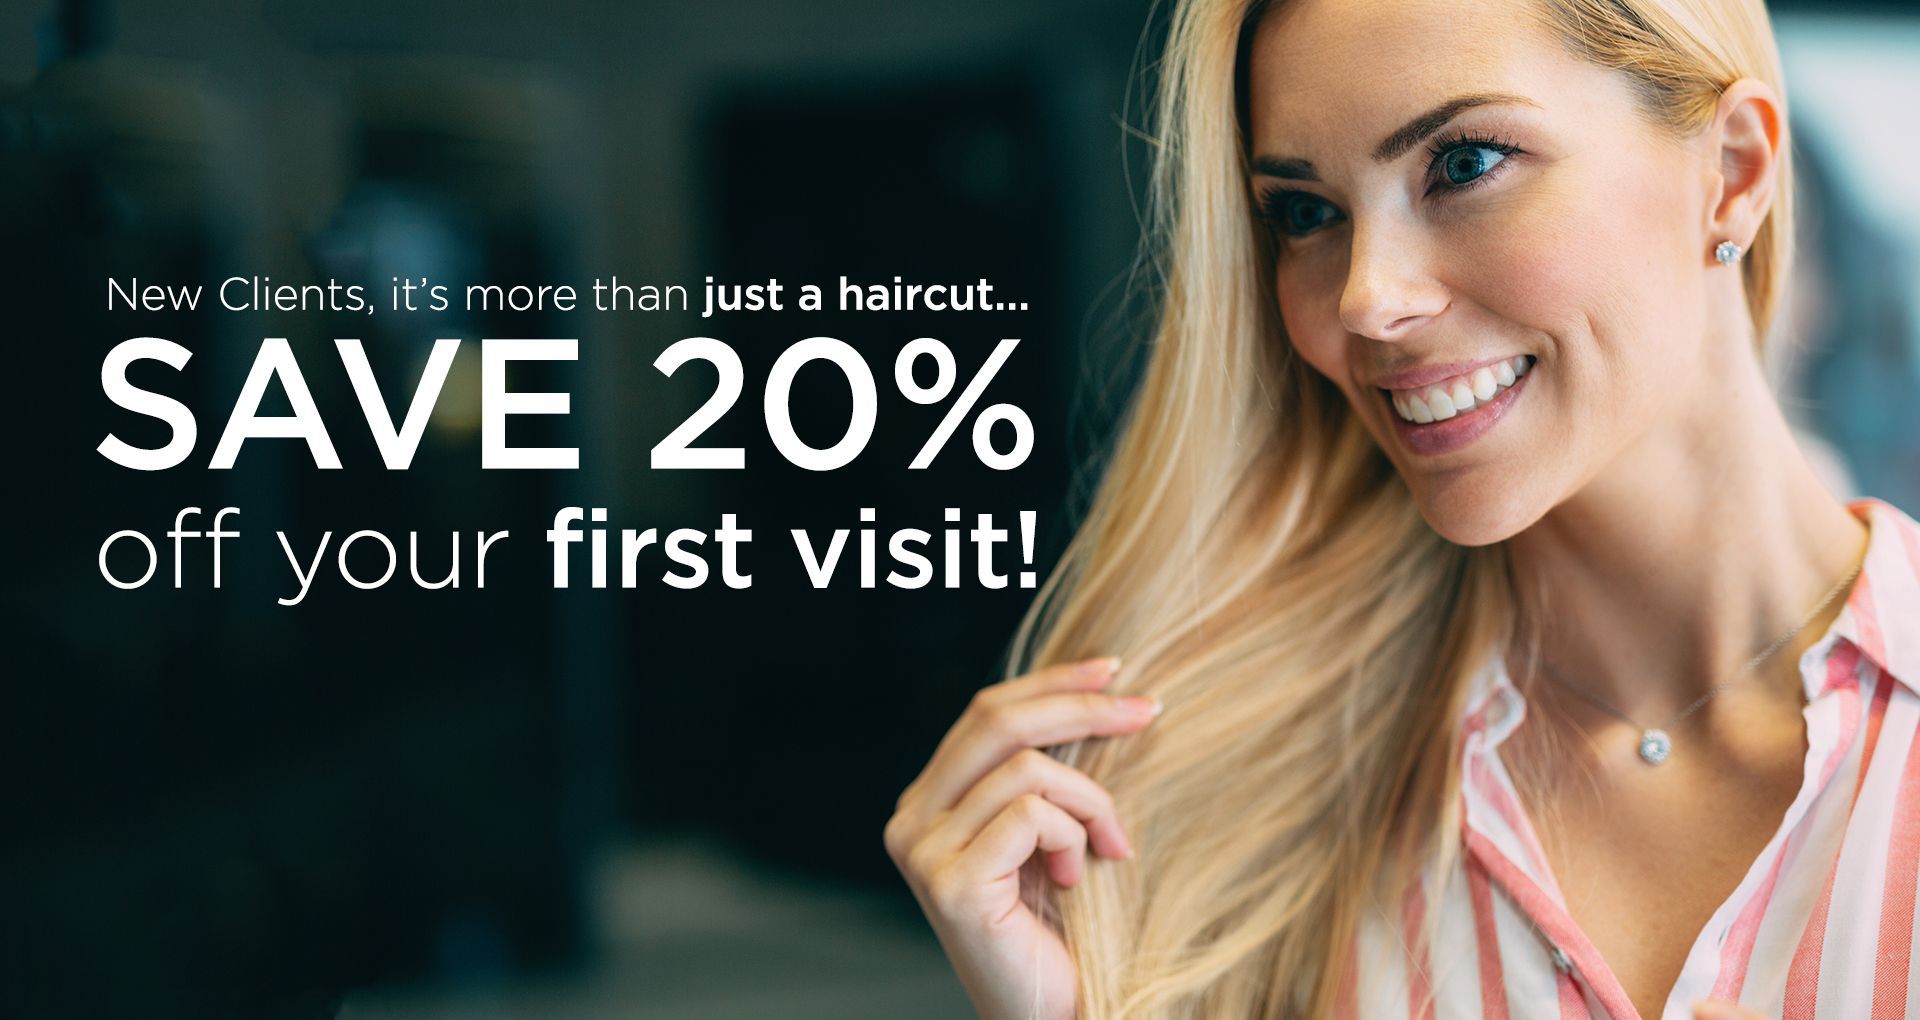 New Customer Offer: 20% Off on hair services